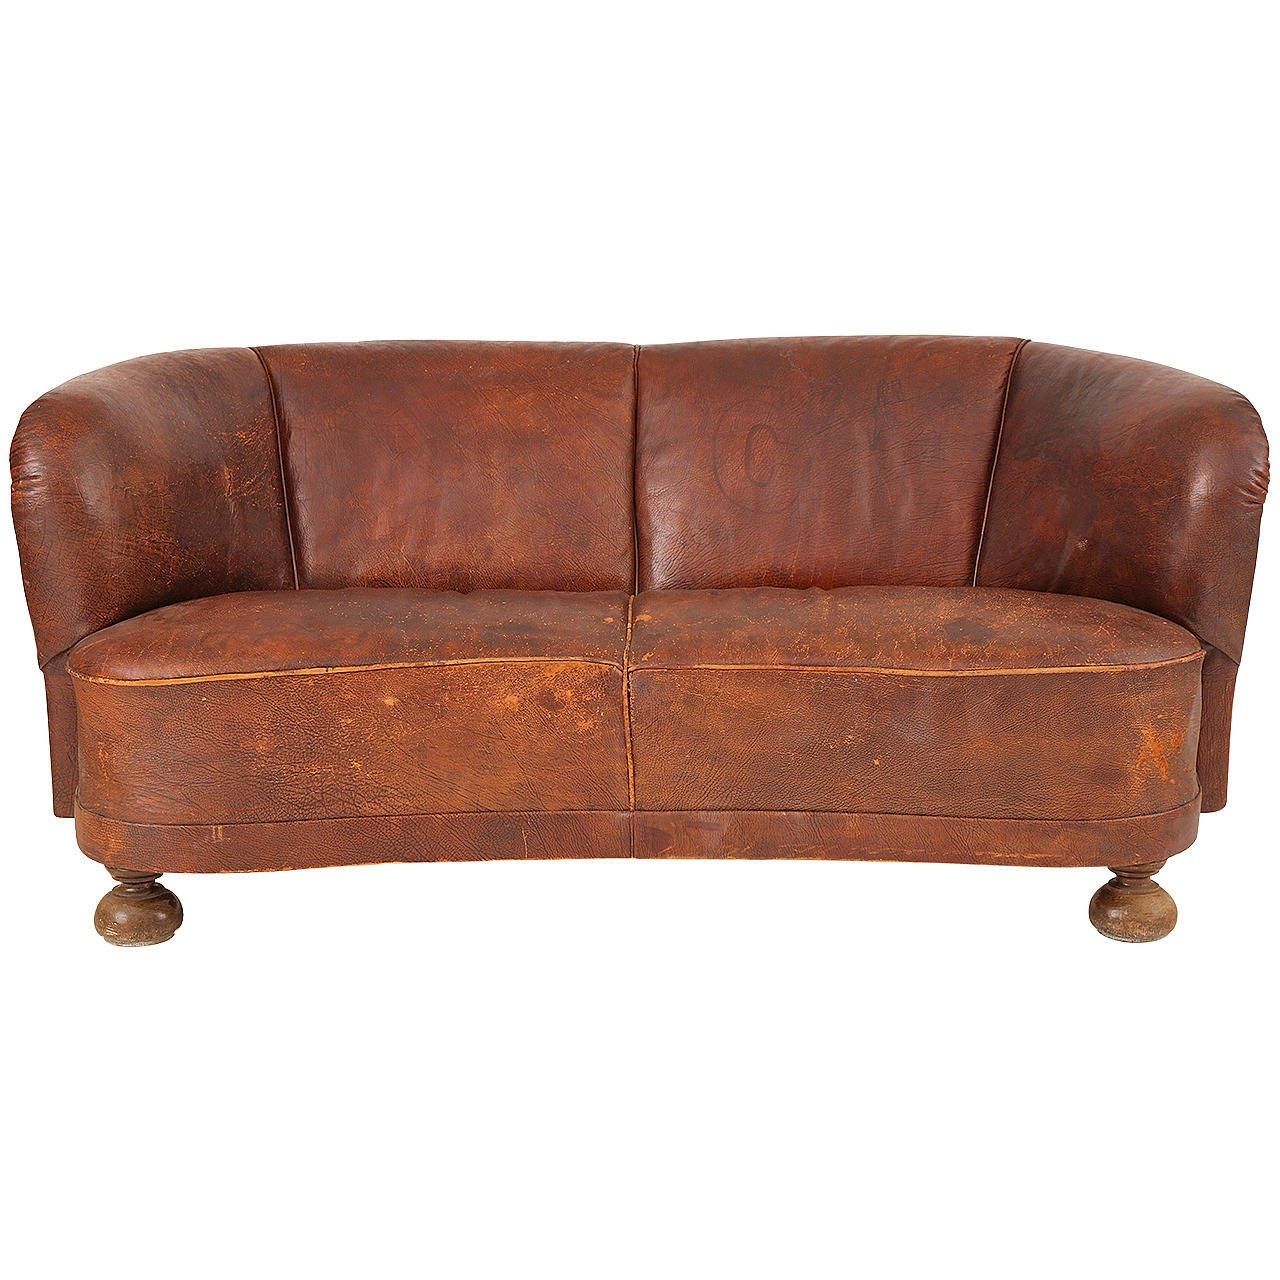 1930s Free Form Danish Leather Sofa After Flemming Lassen For Sale Regarding 1930s Couch (View 8 of 15)